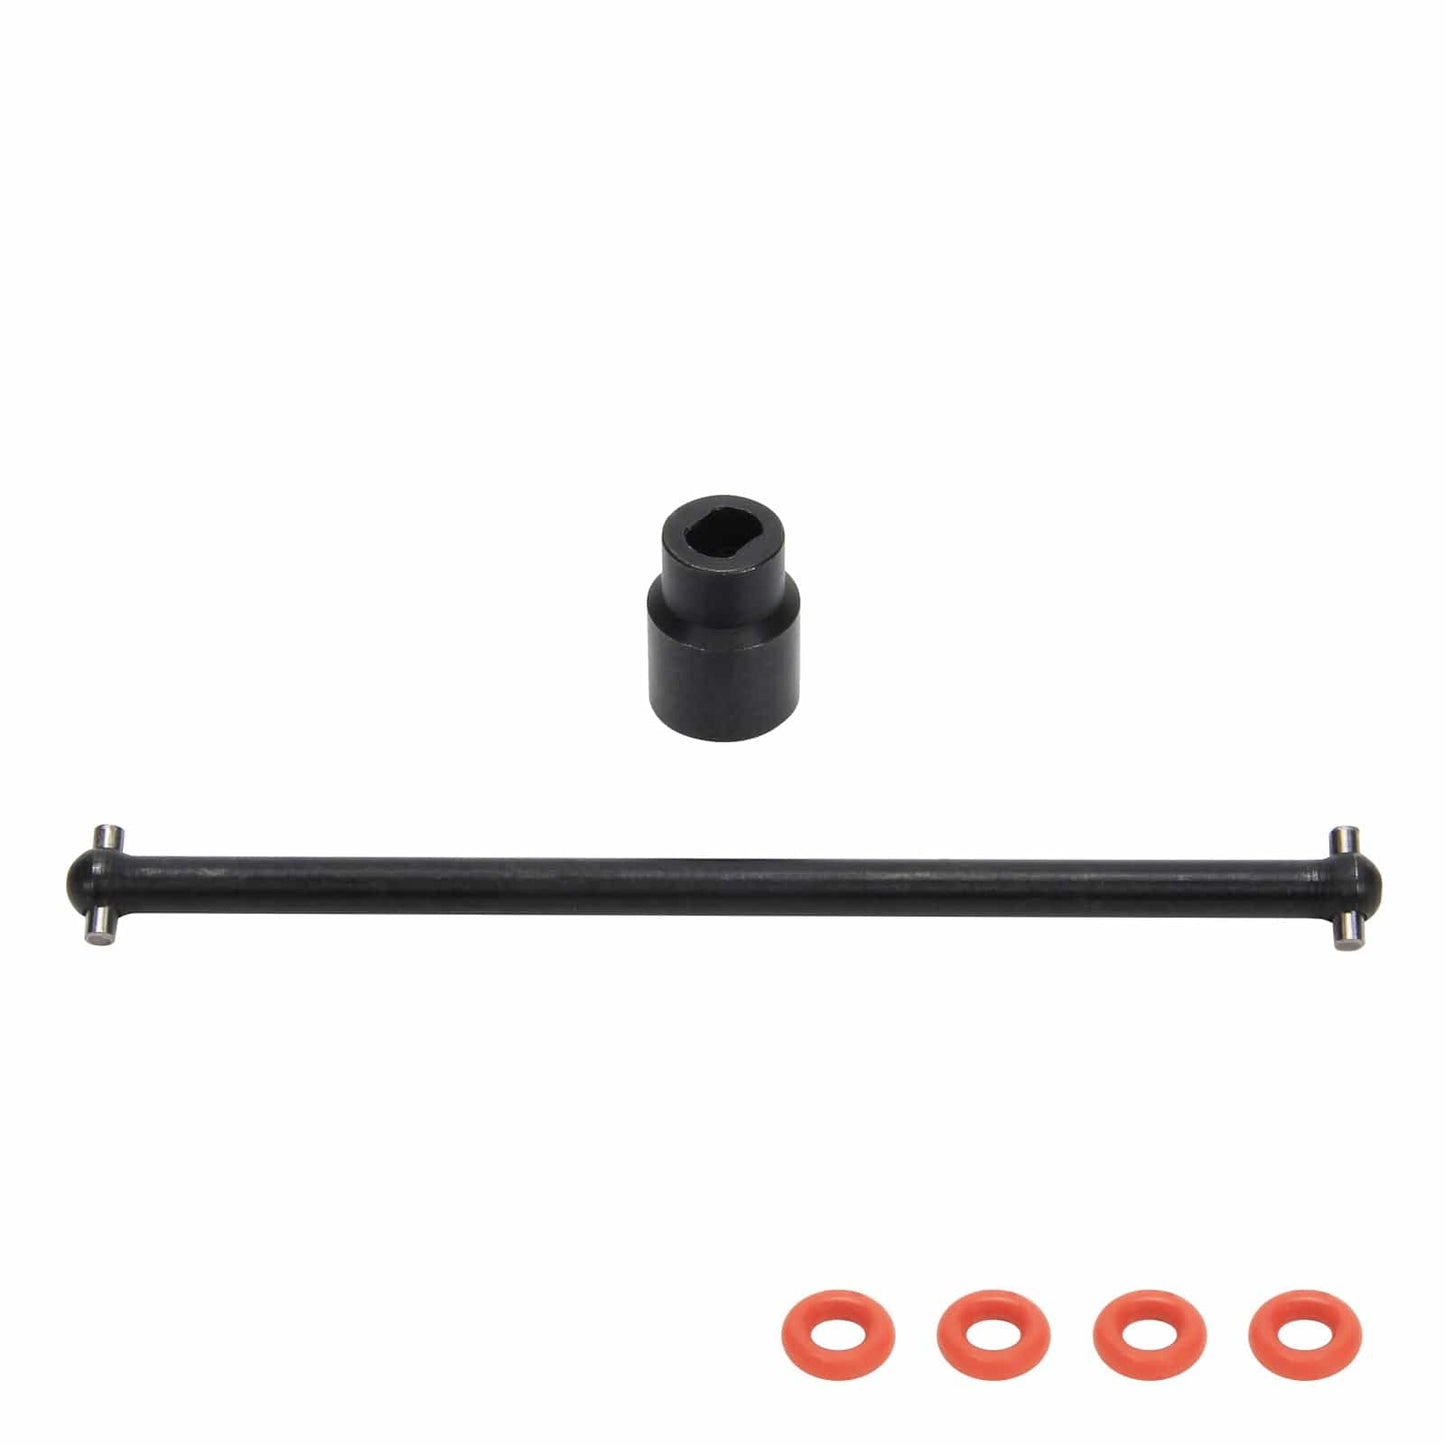 RCAWD Axial AXI31627 RCAWD Axial AXI31627 Upgrades Drive Shaft  for Yeti Jr Can-Am Maverick